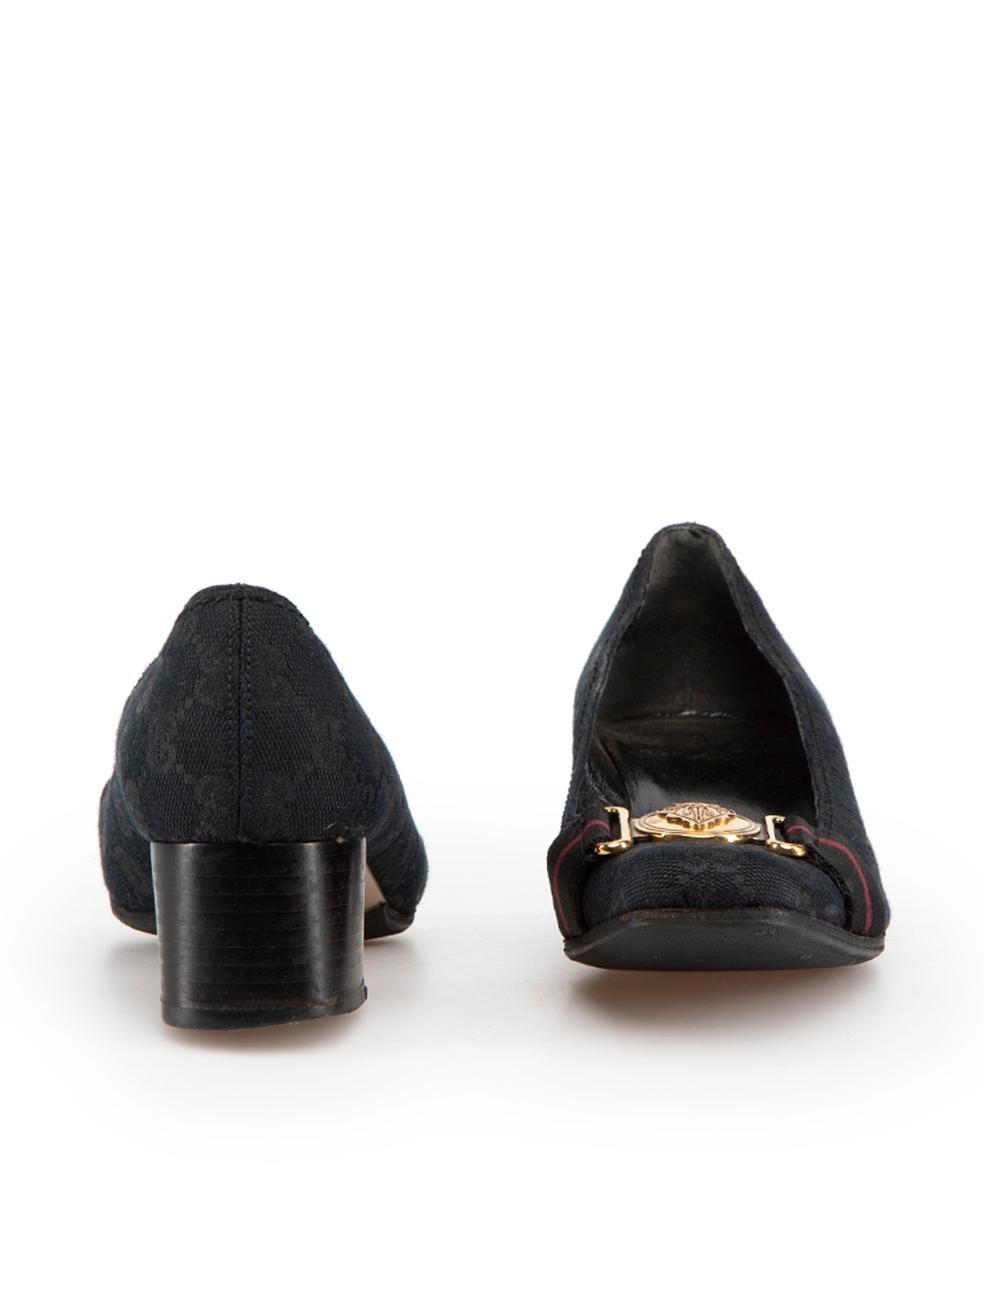 Gucci Black GG Web Buckle Pumps Size IT 36 In Good Condition For Sale In London, GB